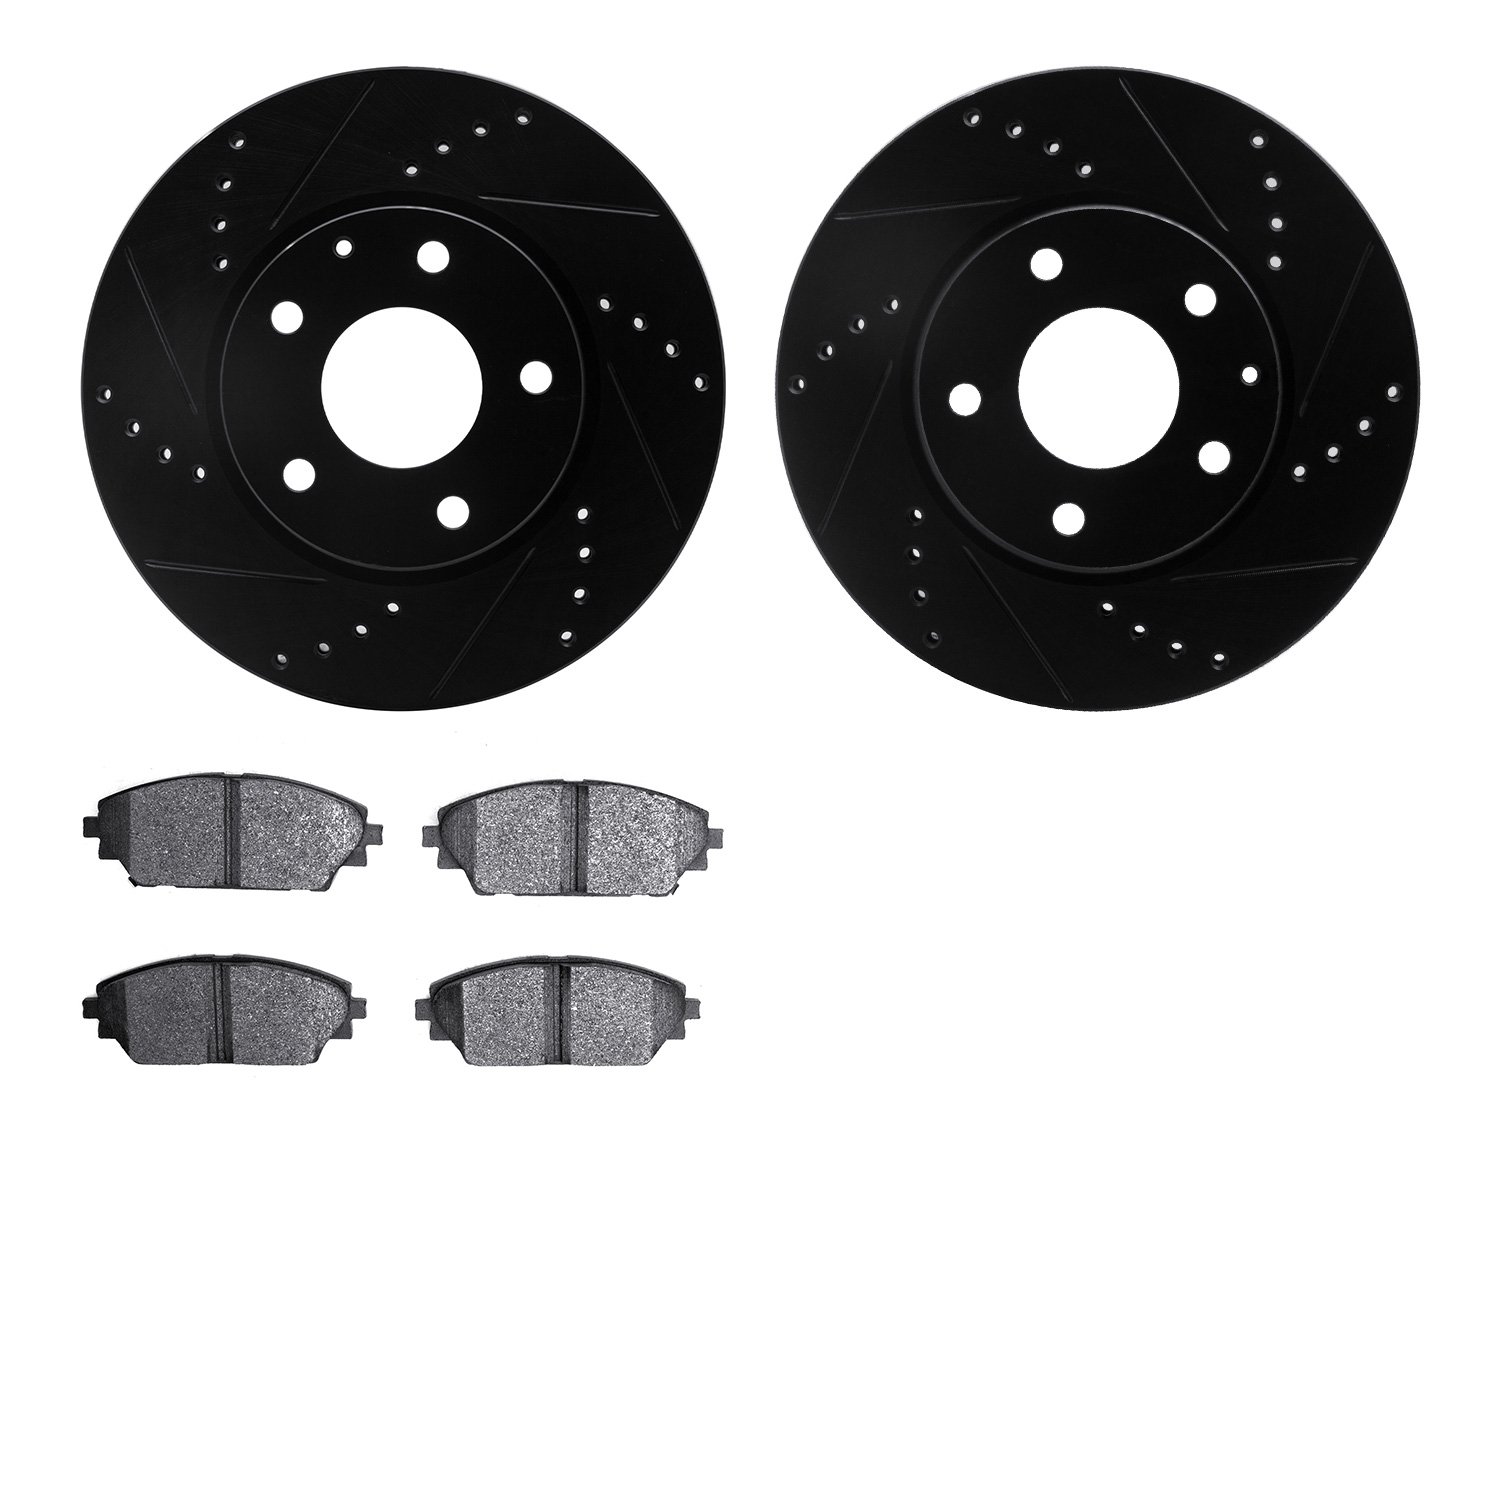 8302-80081 Drilled/Slotted Brake Rotors with 3000-Series Ceramic Brake Pads Kit [Black], Fits Select Ford/Lincoln/Mercury/Mazda,